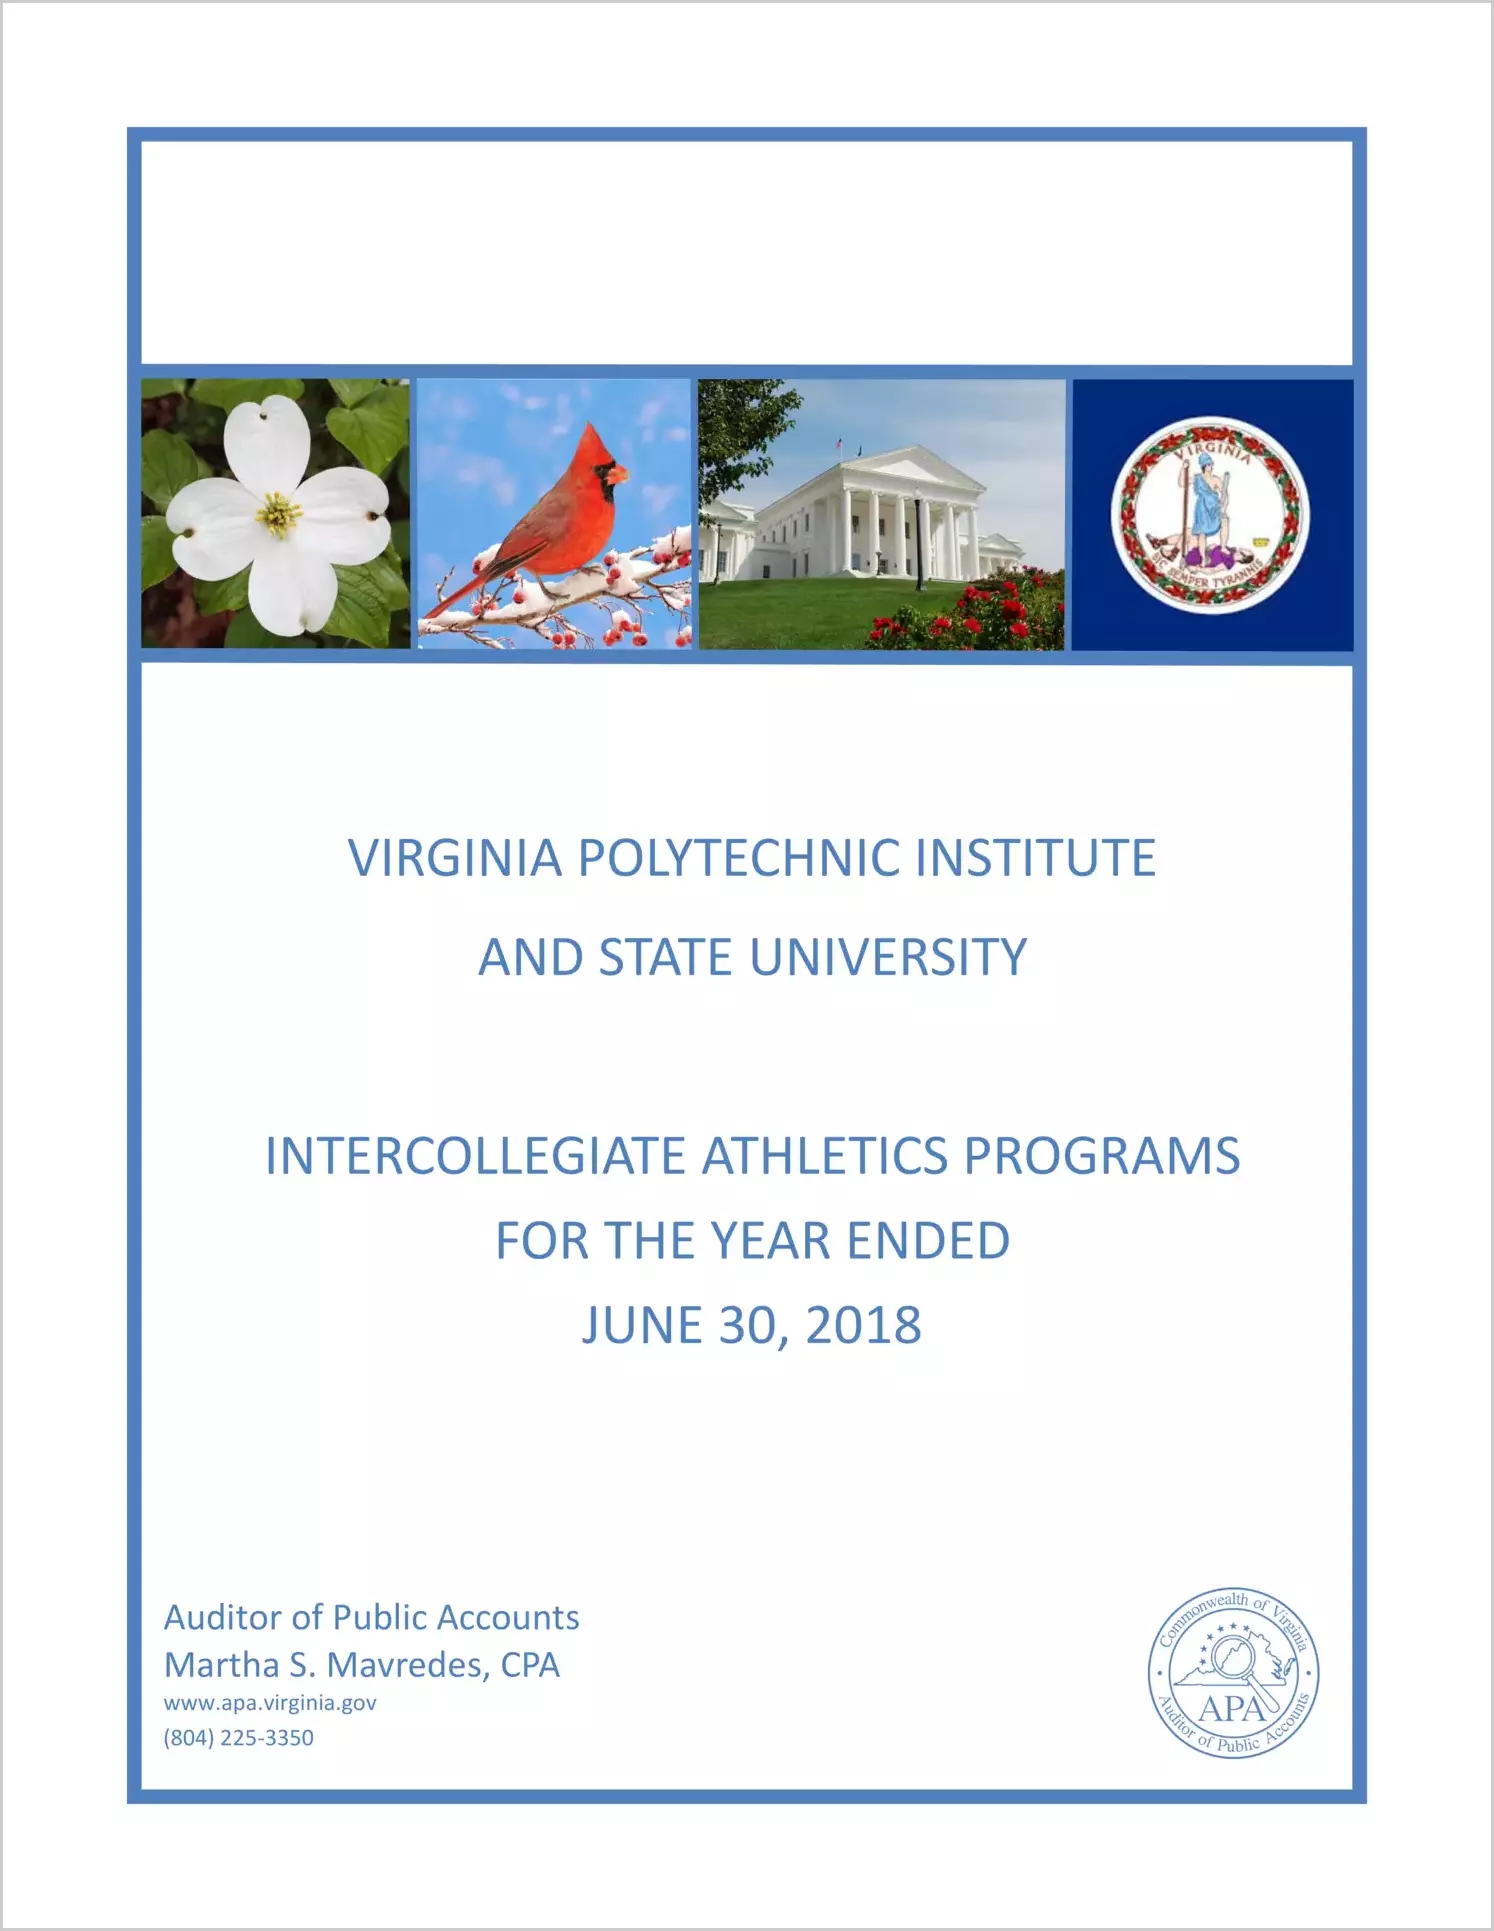 Virginia Polytechnic Institute and State University Intercollegiate Athletics Programs for the year ended June 30, 2018